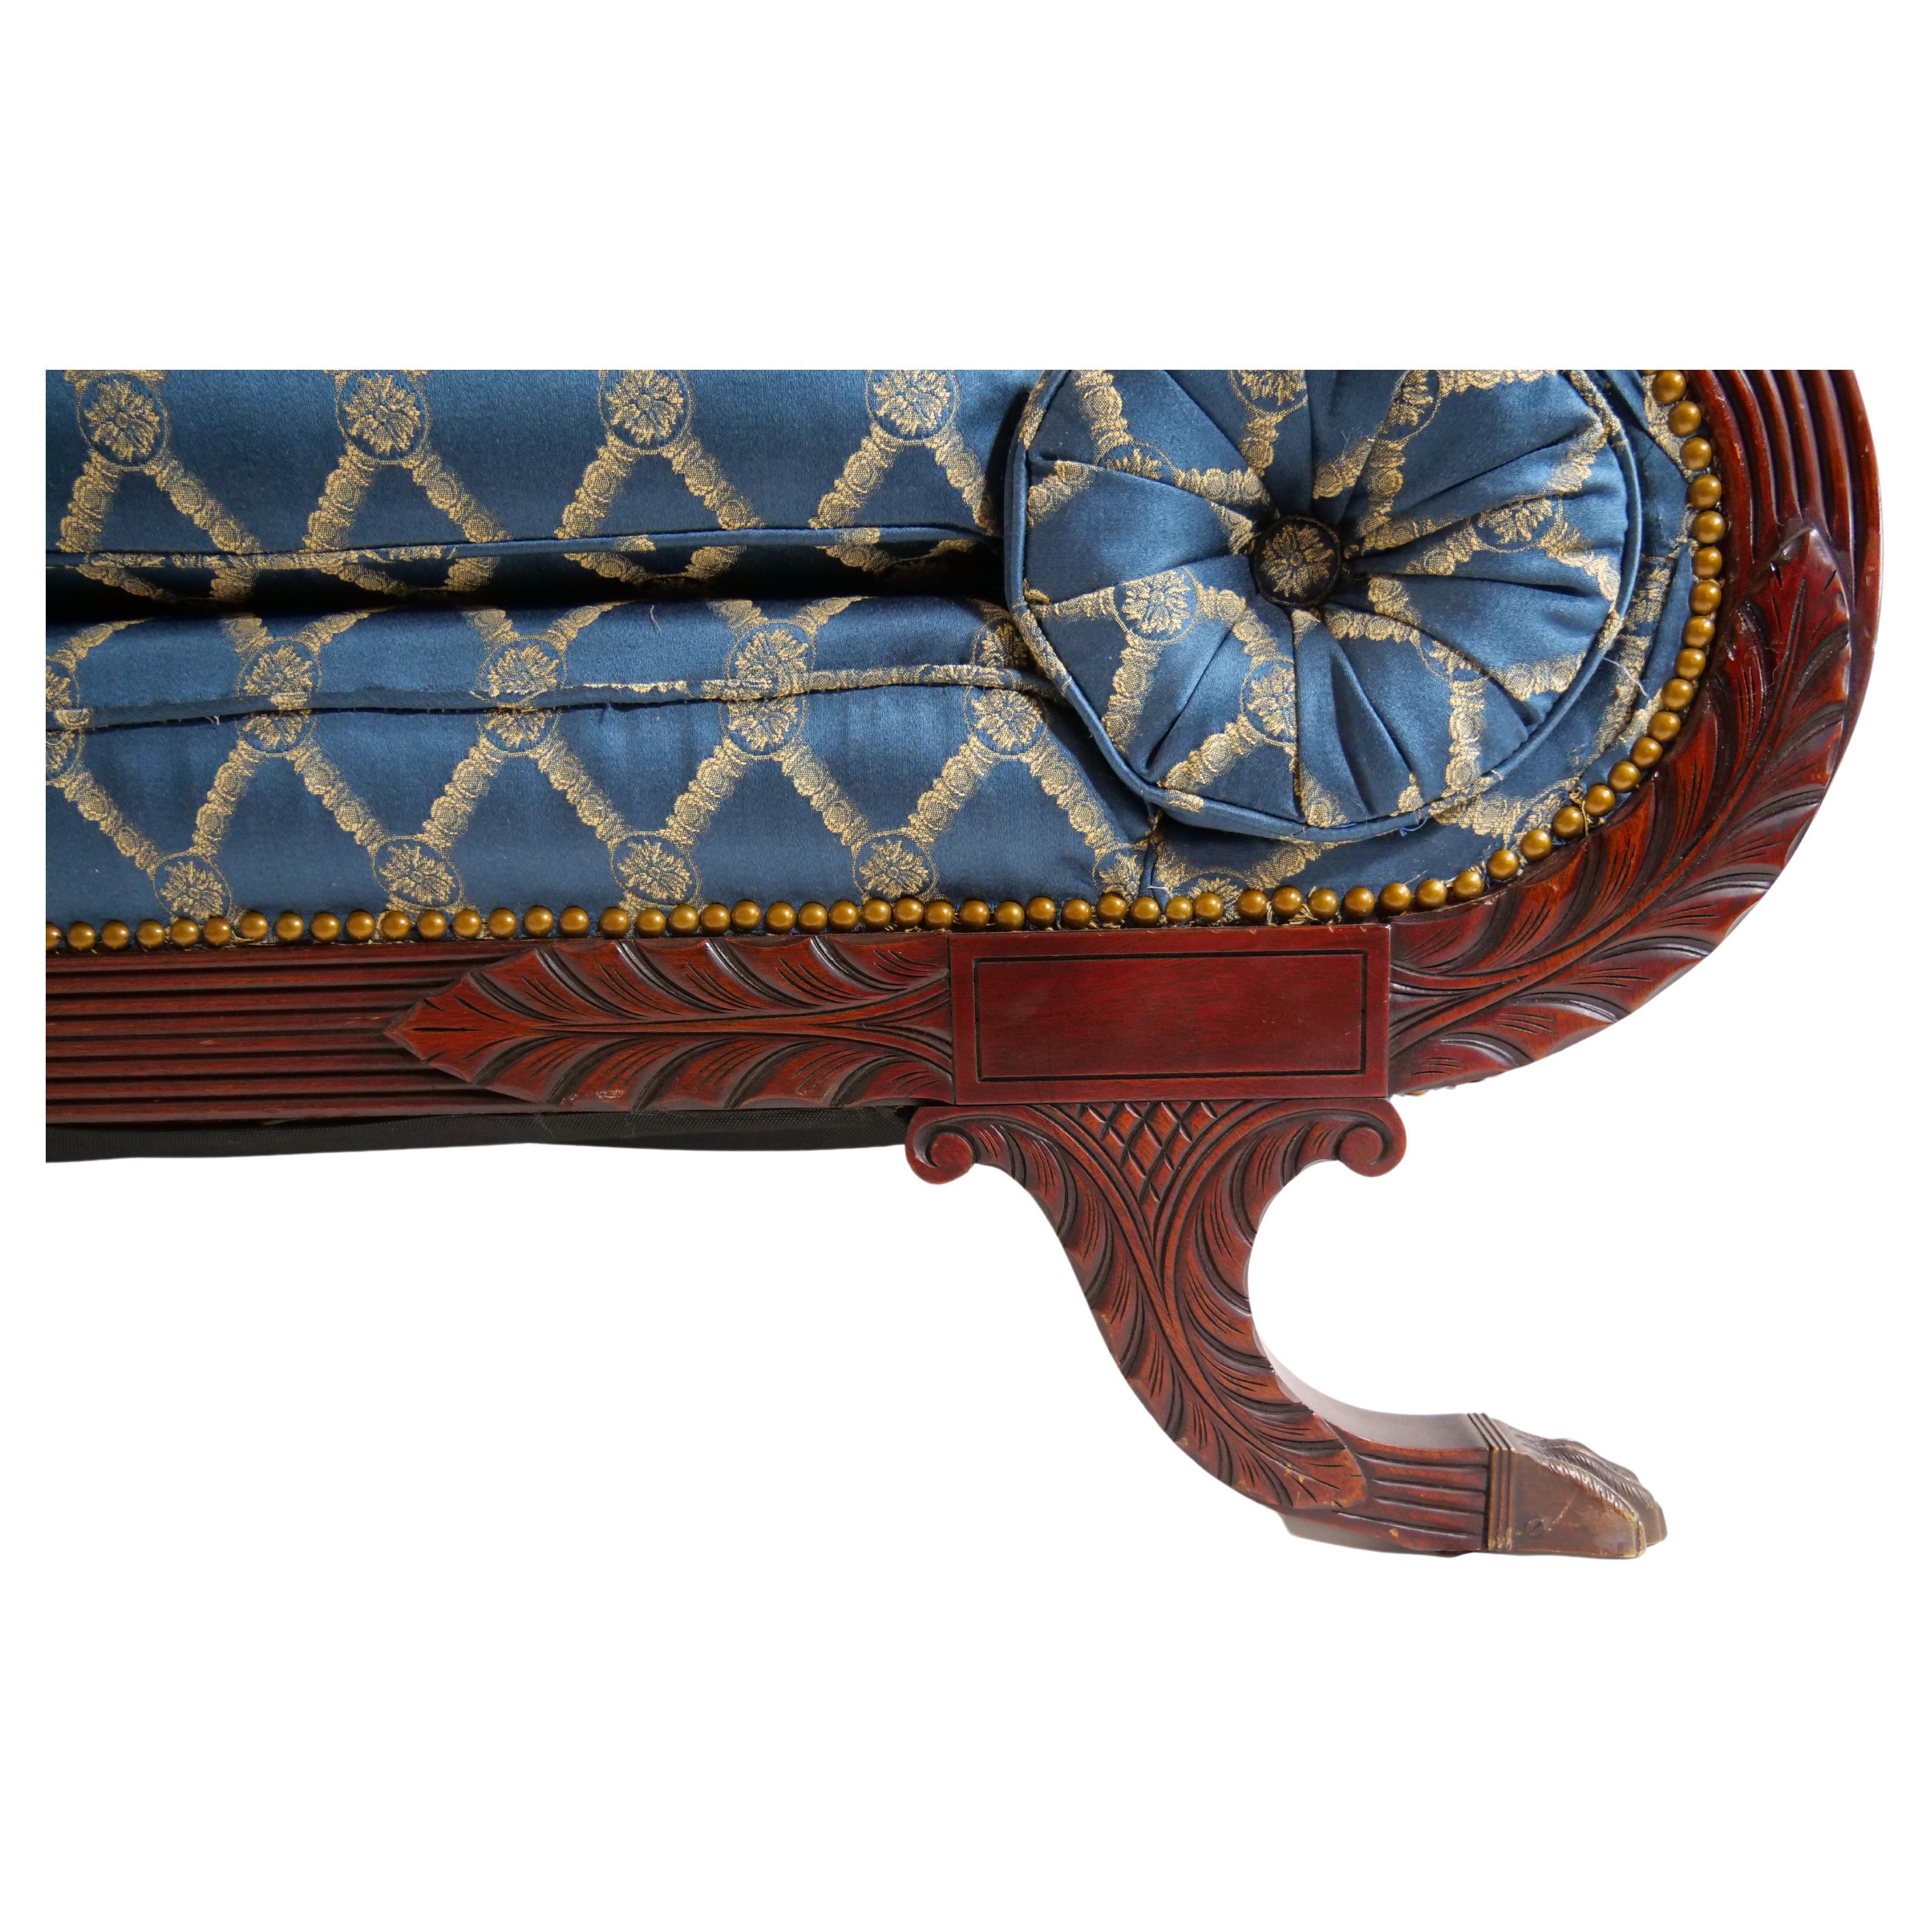 Early 19th Century 19th Century Empire Style Mahogany Framed Upholstered Sofa For Sale